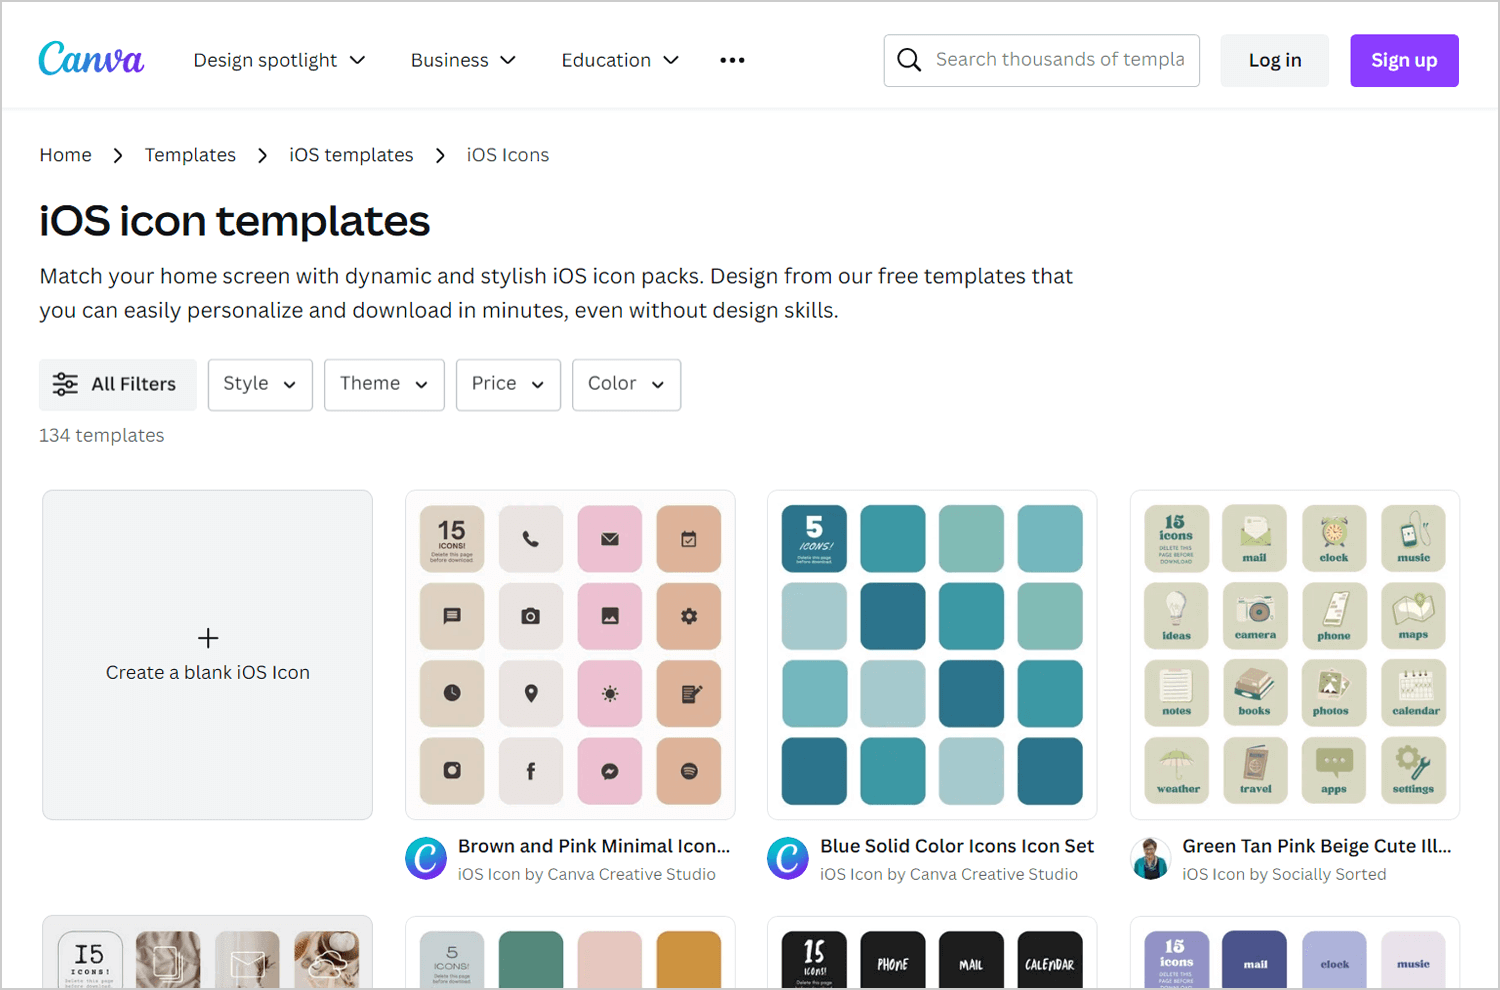 Canva interface displaying a selection of iOS icon templates with options to filter by style, theme, price, and color